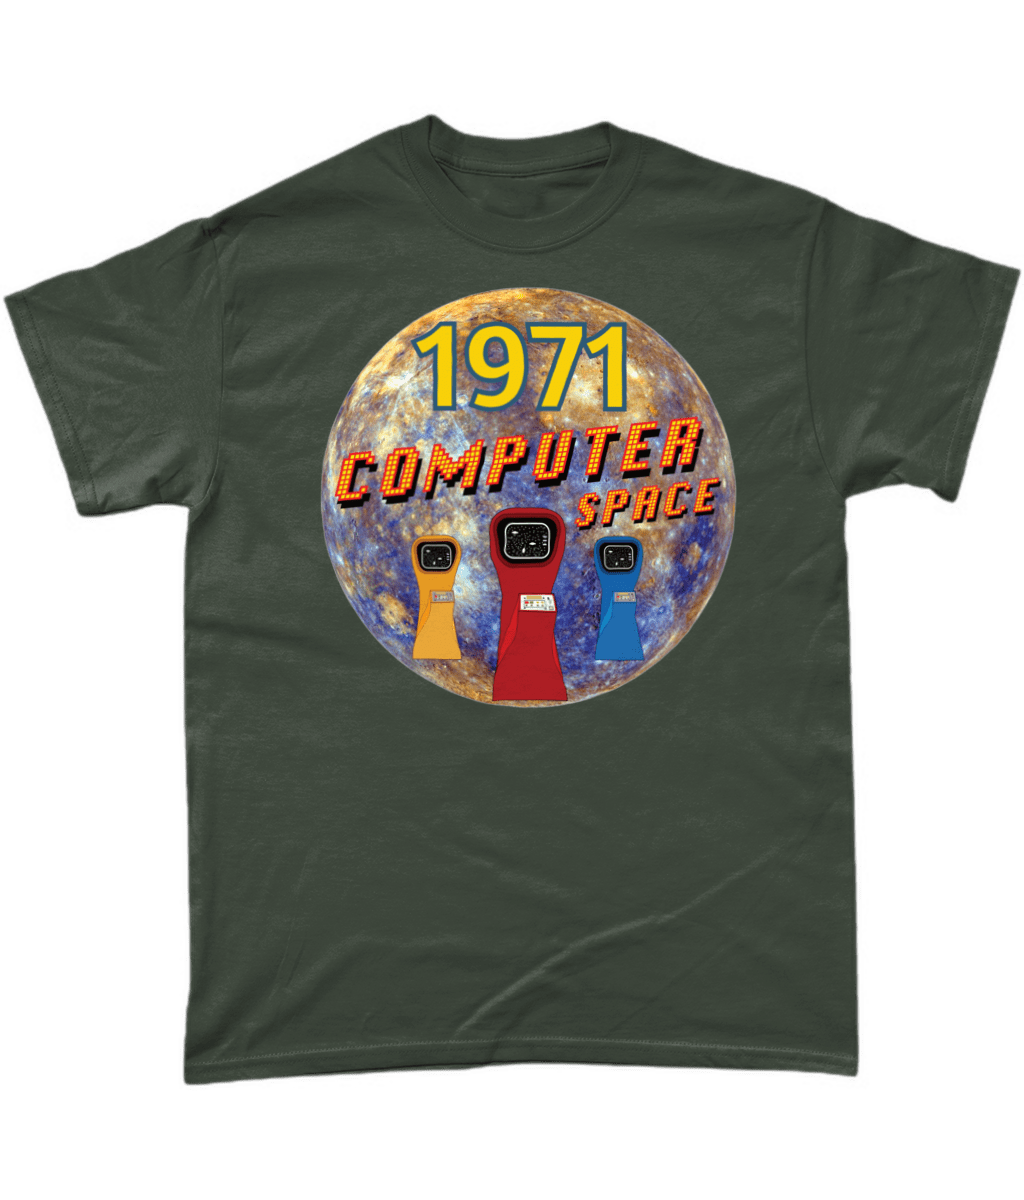 Green T-Shirt with the words 1971,computer space,one of a kind,large earth, 3 computer space arcade macines